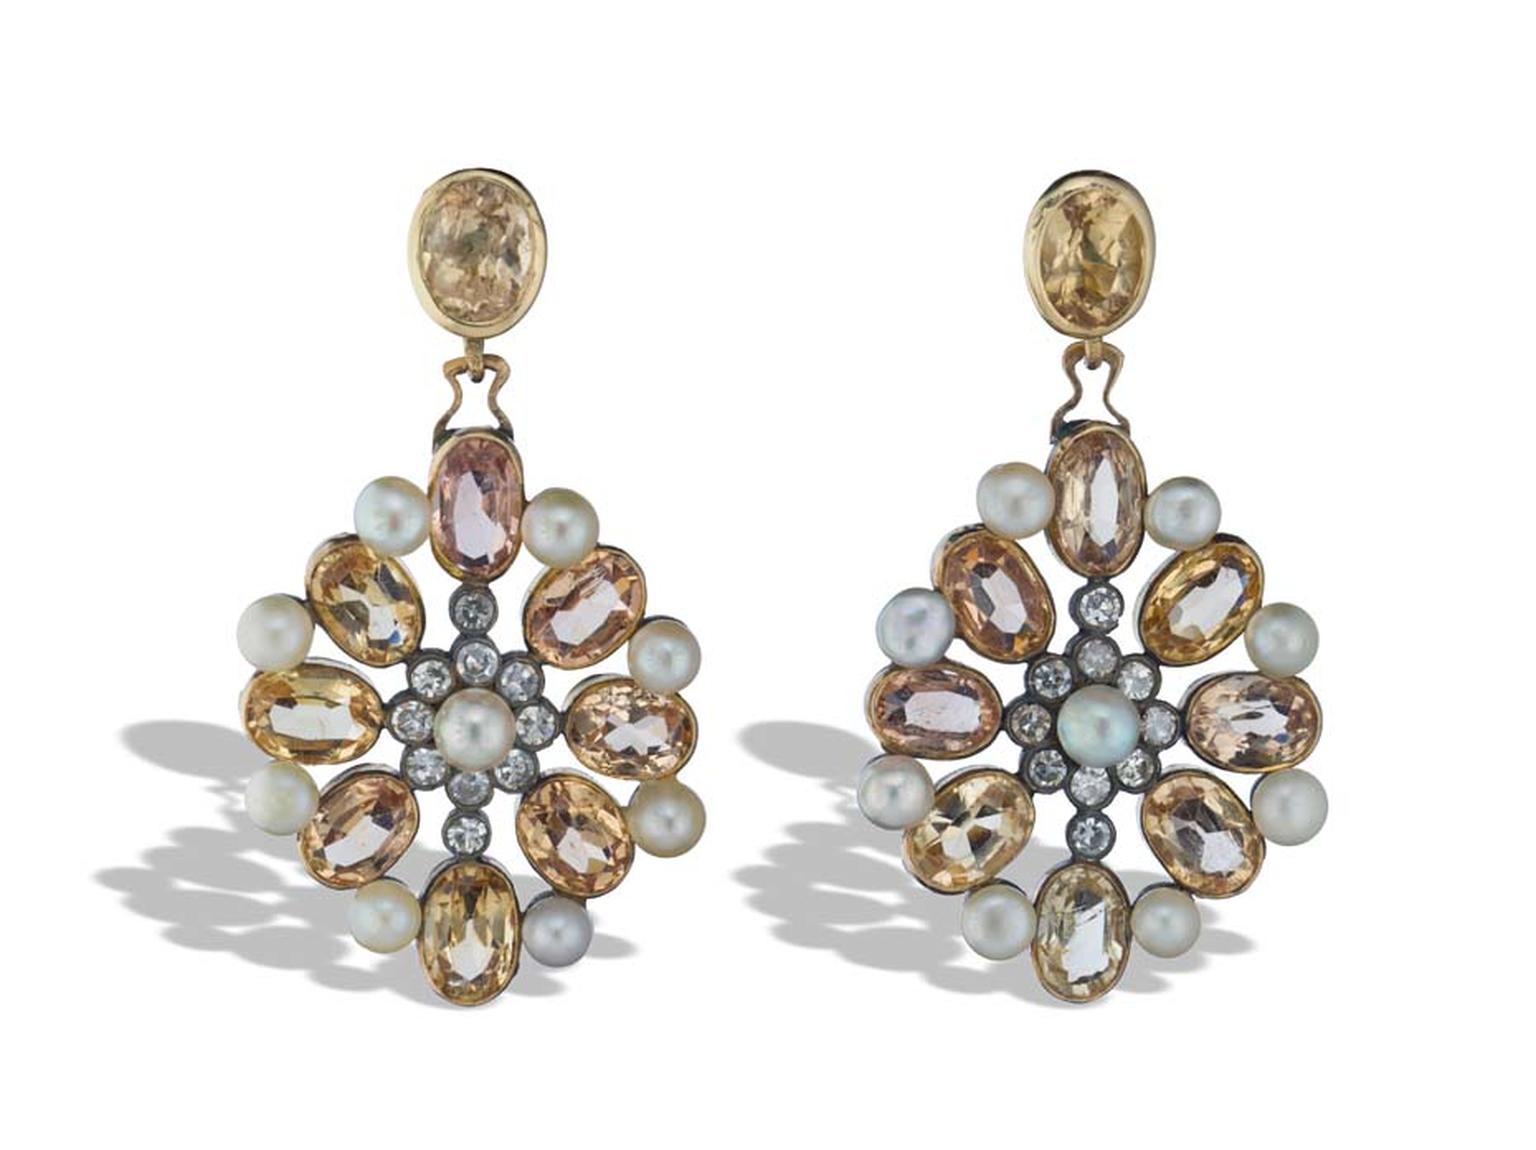 The vintage diamond, pearl, citrine and platinum flower Neil Lane earrings worn by Zooey Deschanel on the Golden Globes 2014 red carpet